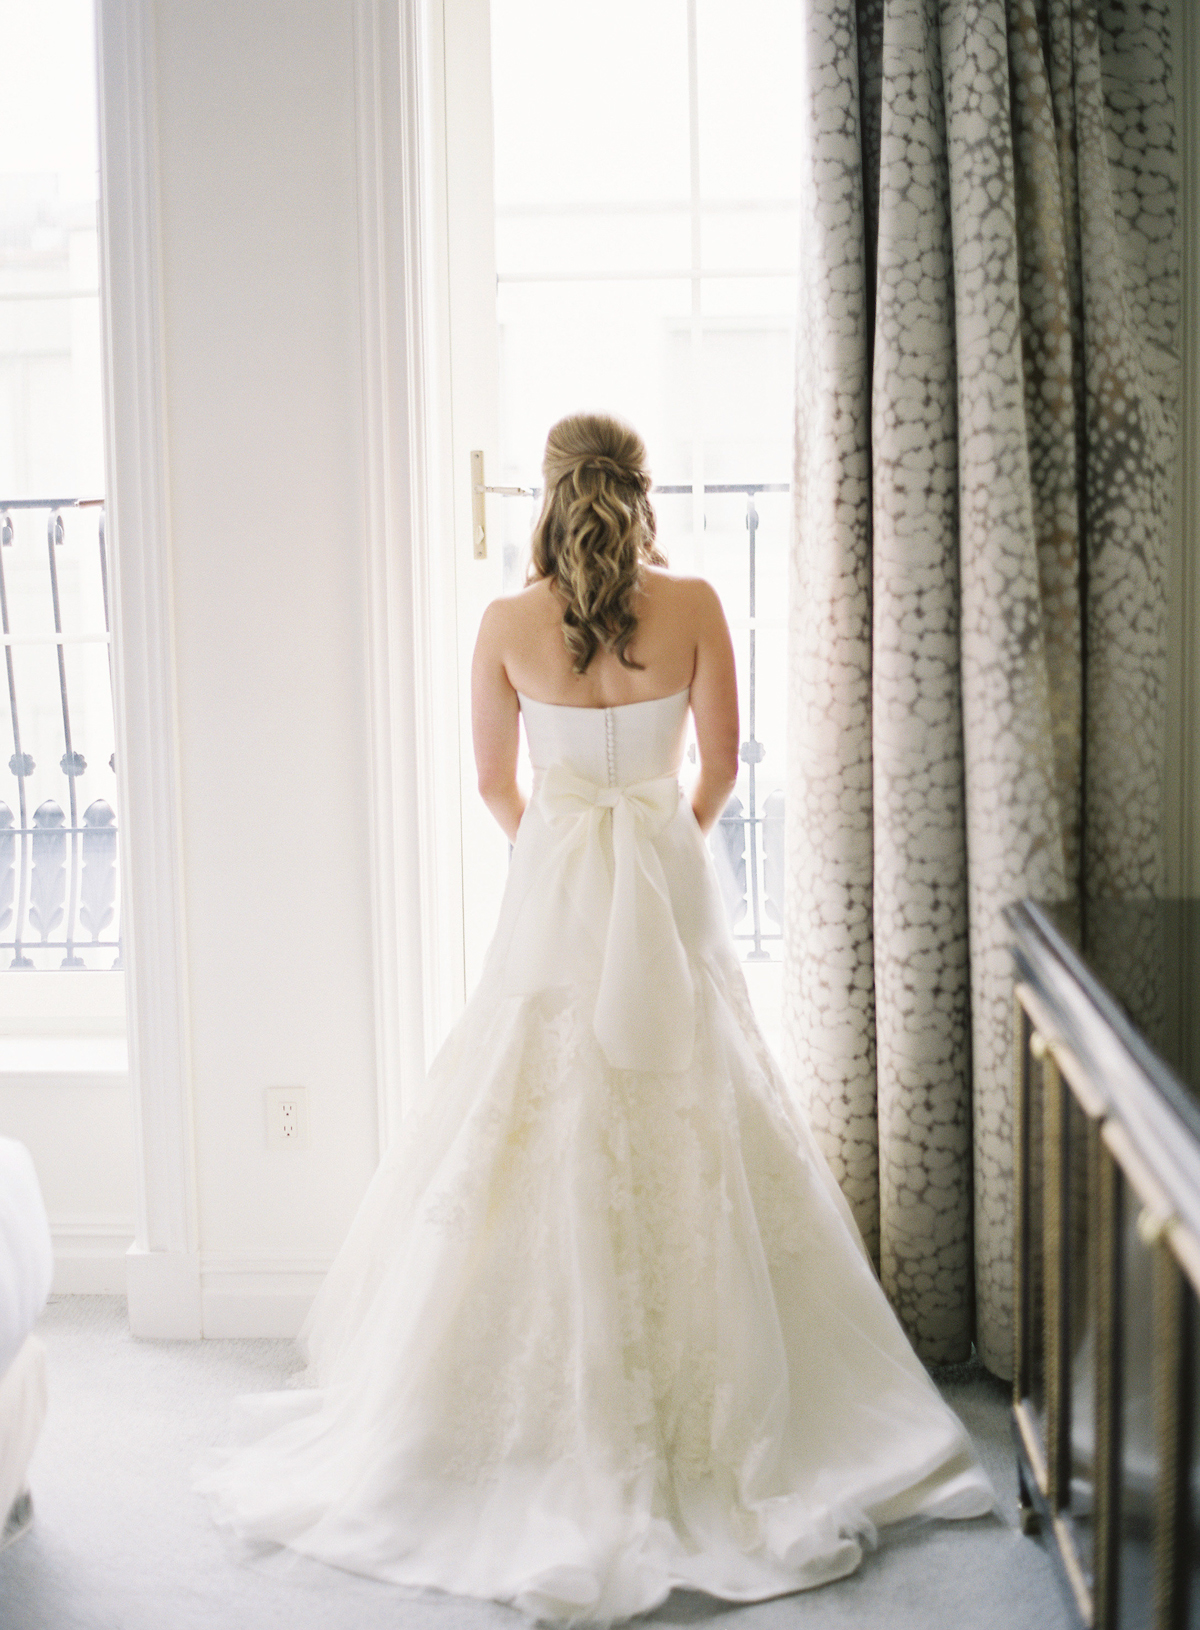 Bride in vera wang gown for Plaza wedding